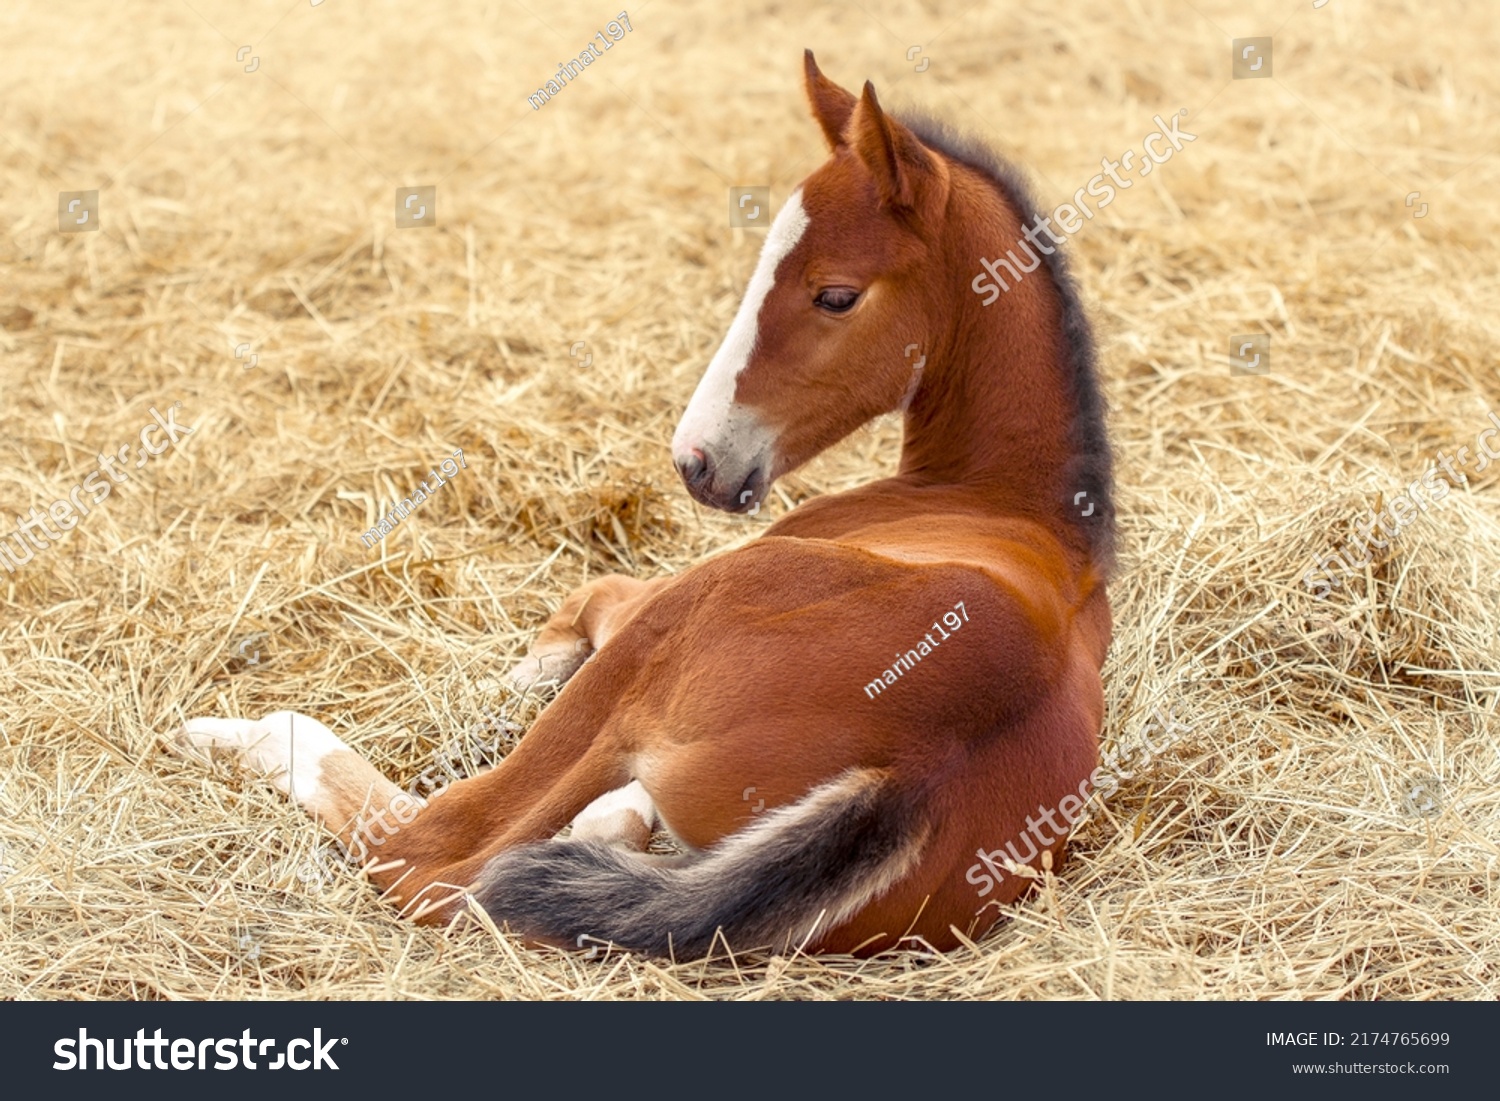 Portrait of a thoroughbred colt . Newborn horse. The beautiful foal is lying in the straw. Sunny summer day. Outdoor. A thoroughbred sports horse #2174765699